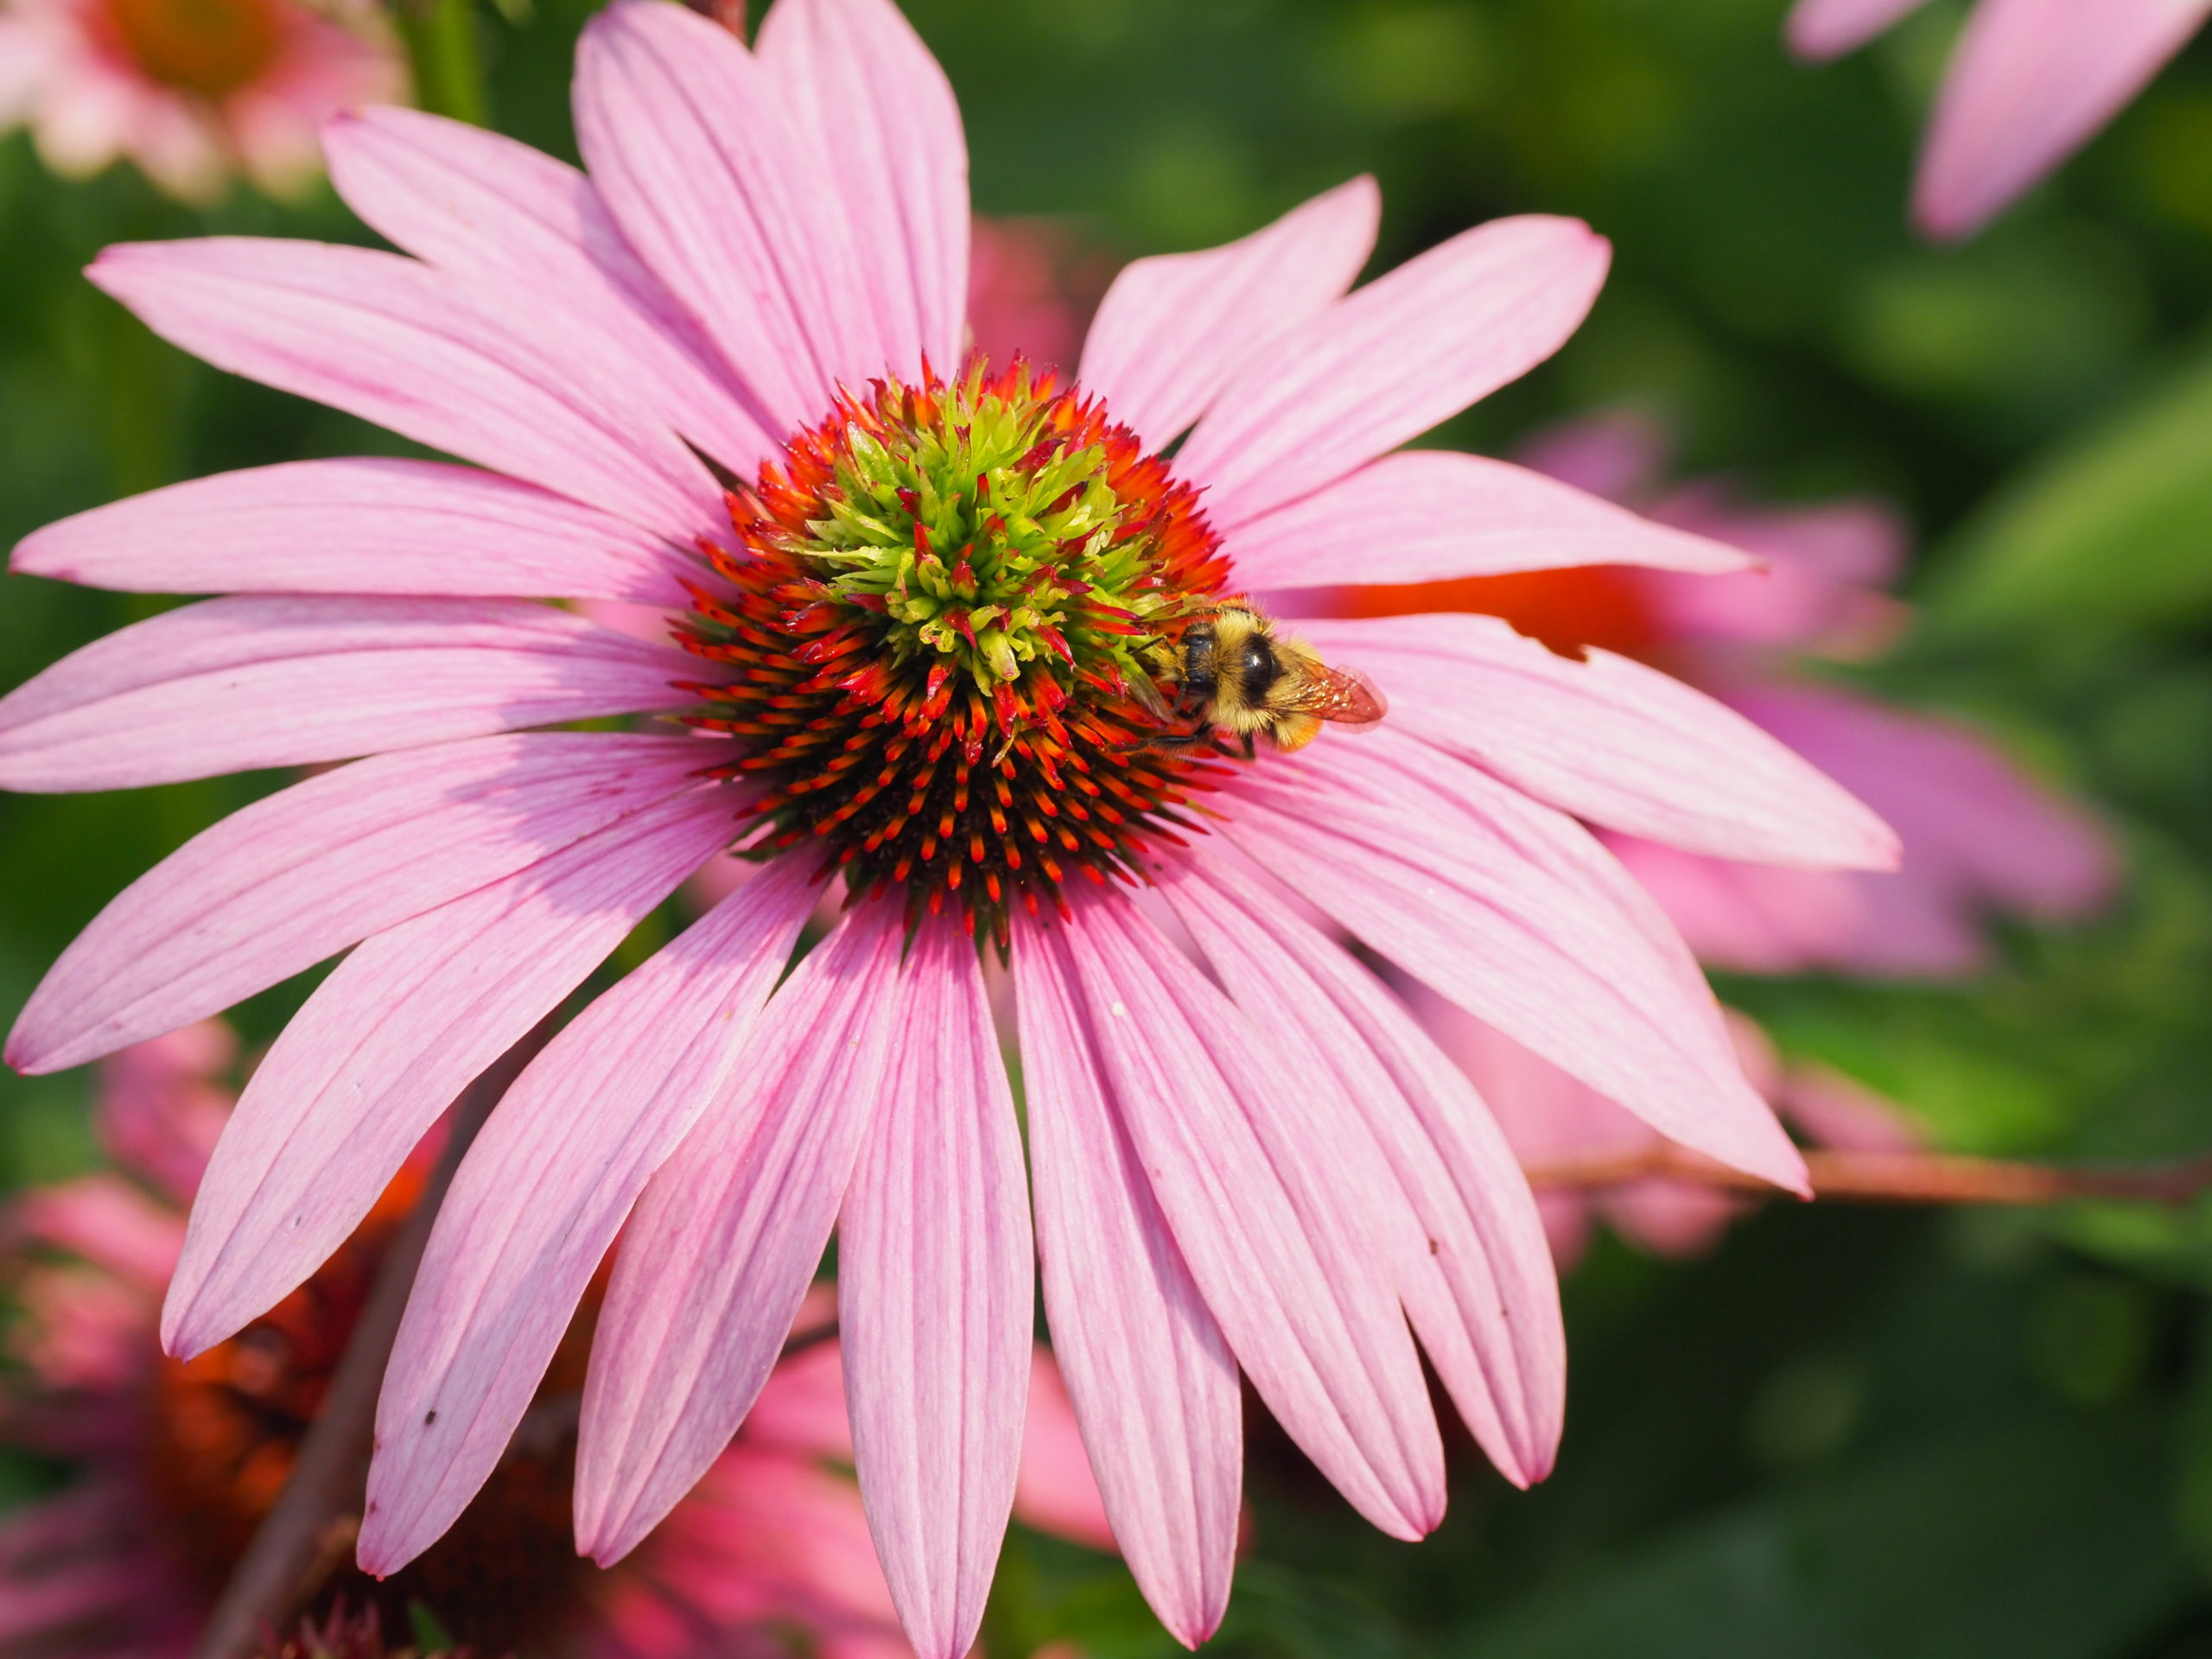 Echinacea purpurea is one of the true wildflowers in the family and attracts a number of pollinators including bees and butterflies.